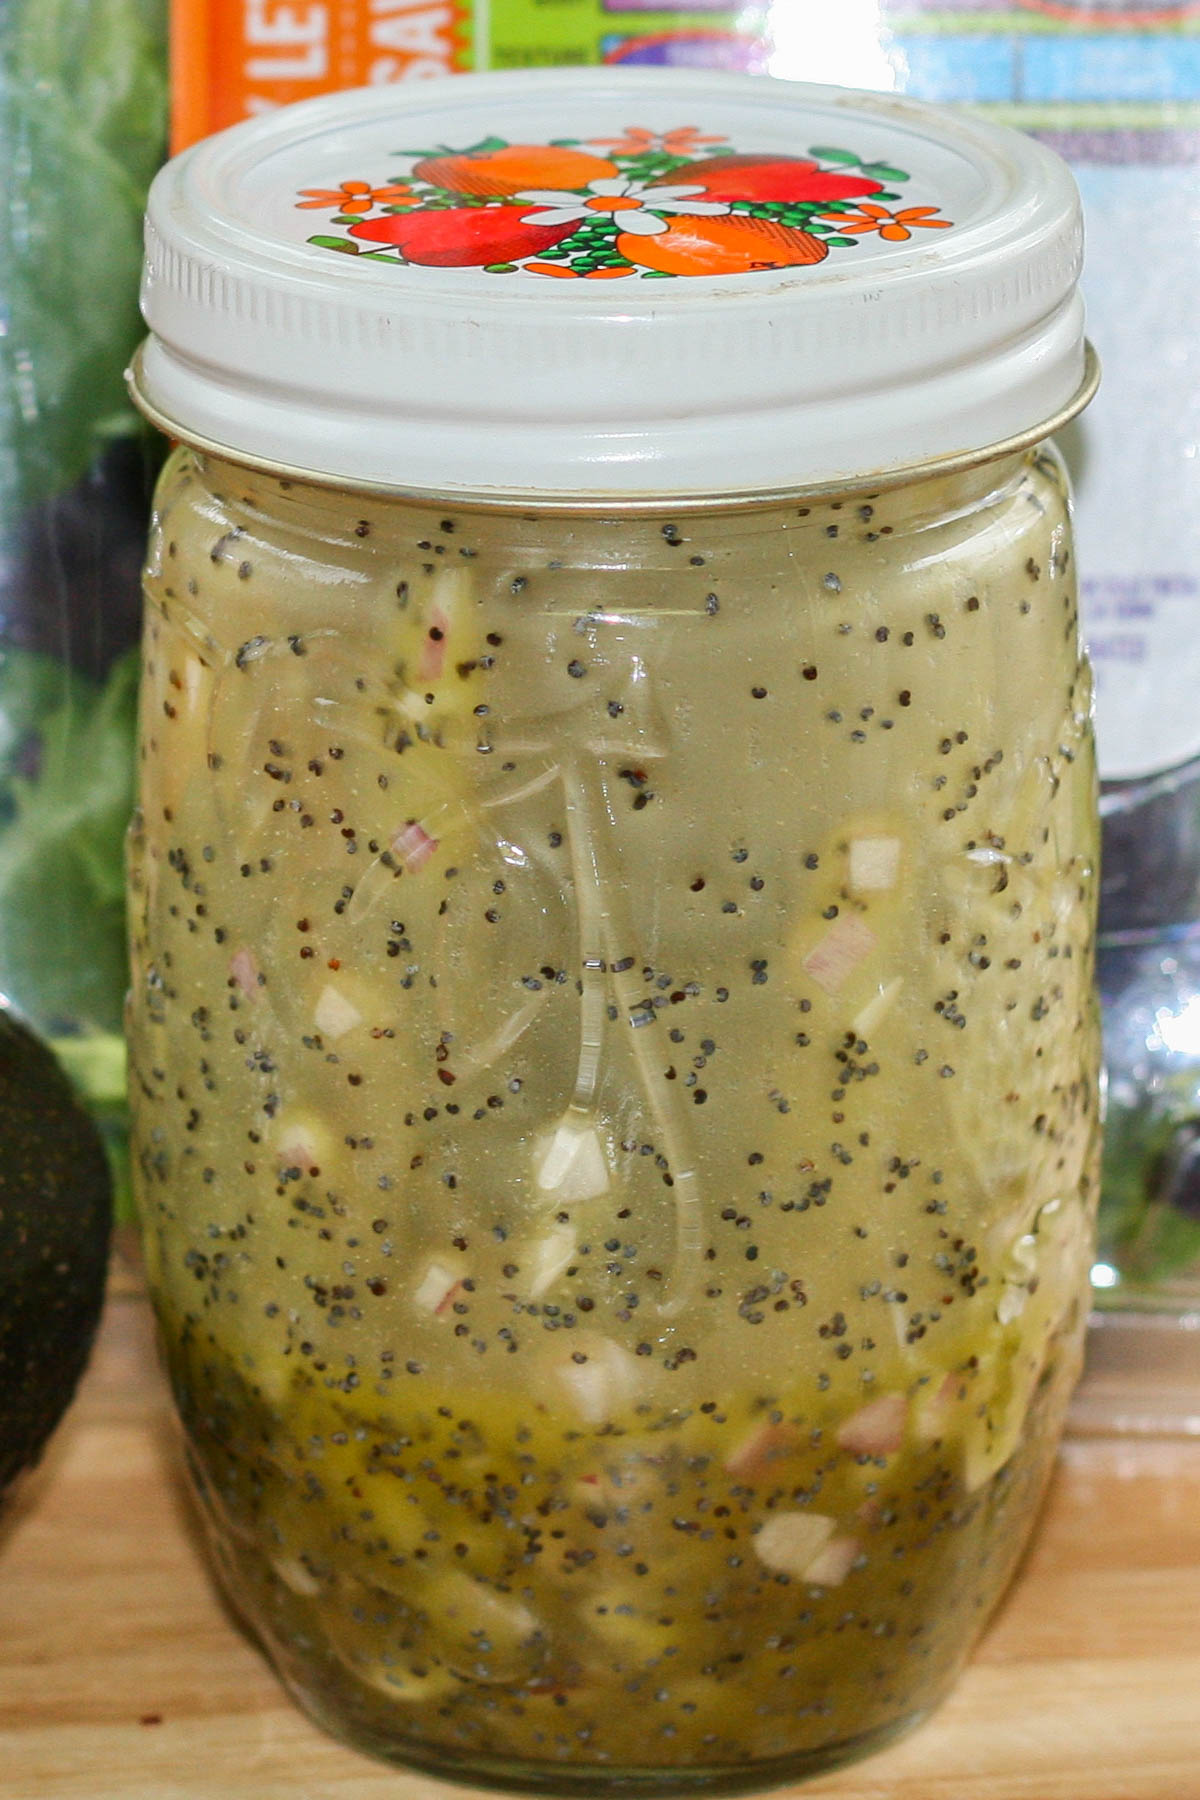 A small glass jar filled with homemade poppyseed dressing.